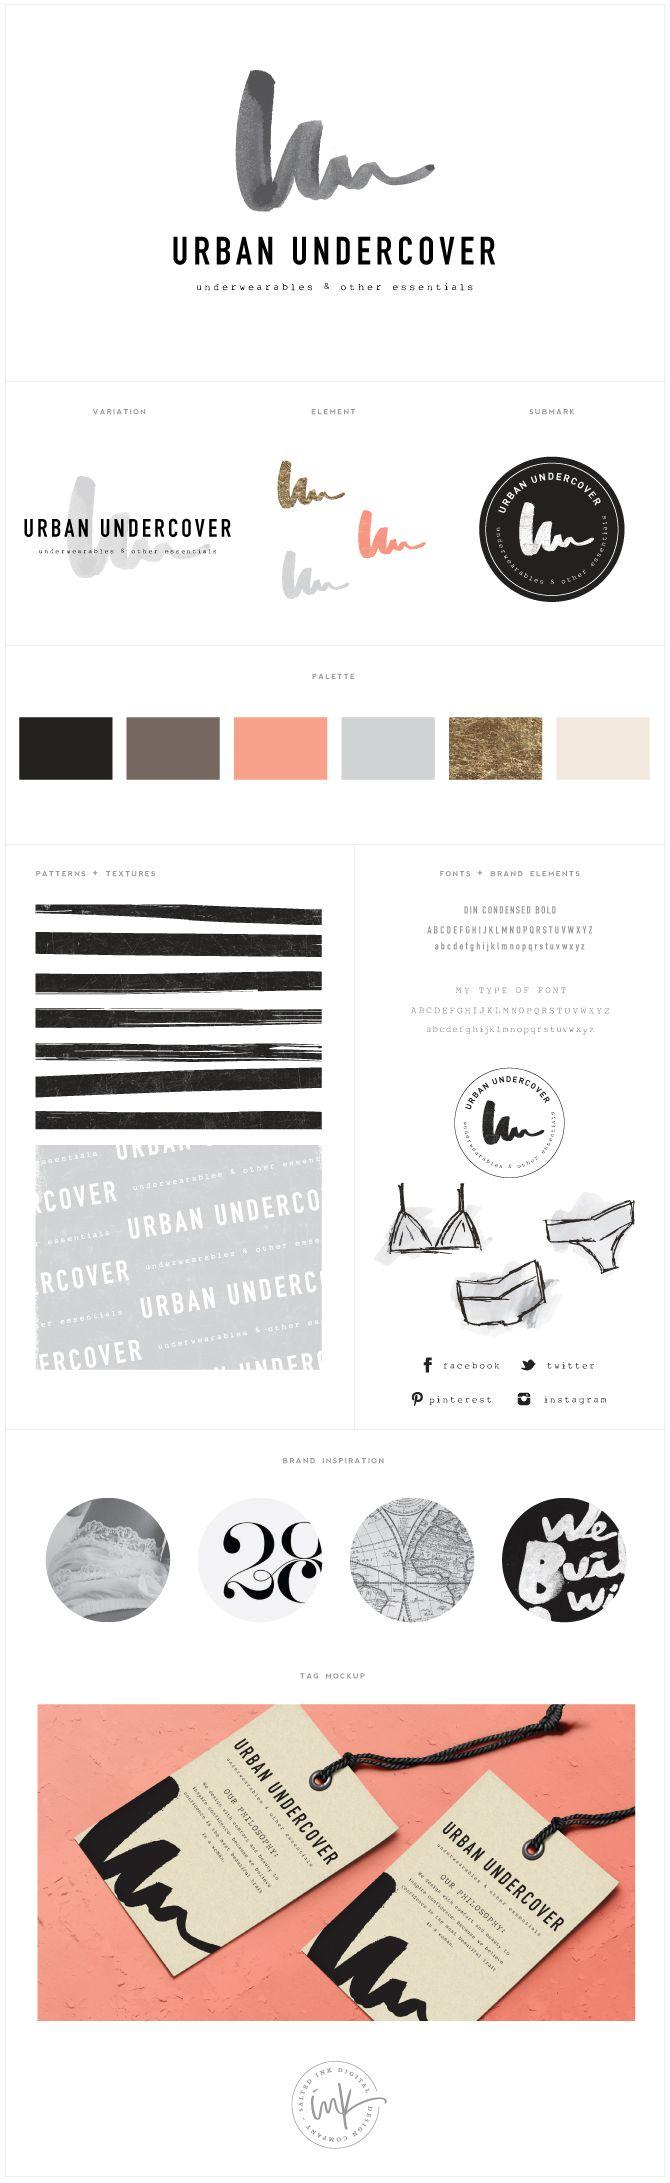 Undercover Brand Logo - Brand Launch: Urban Undercover - Salted Ink Design Co.